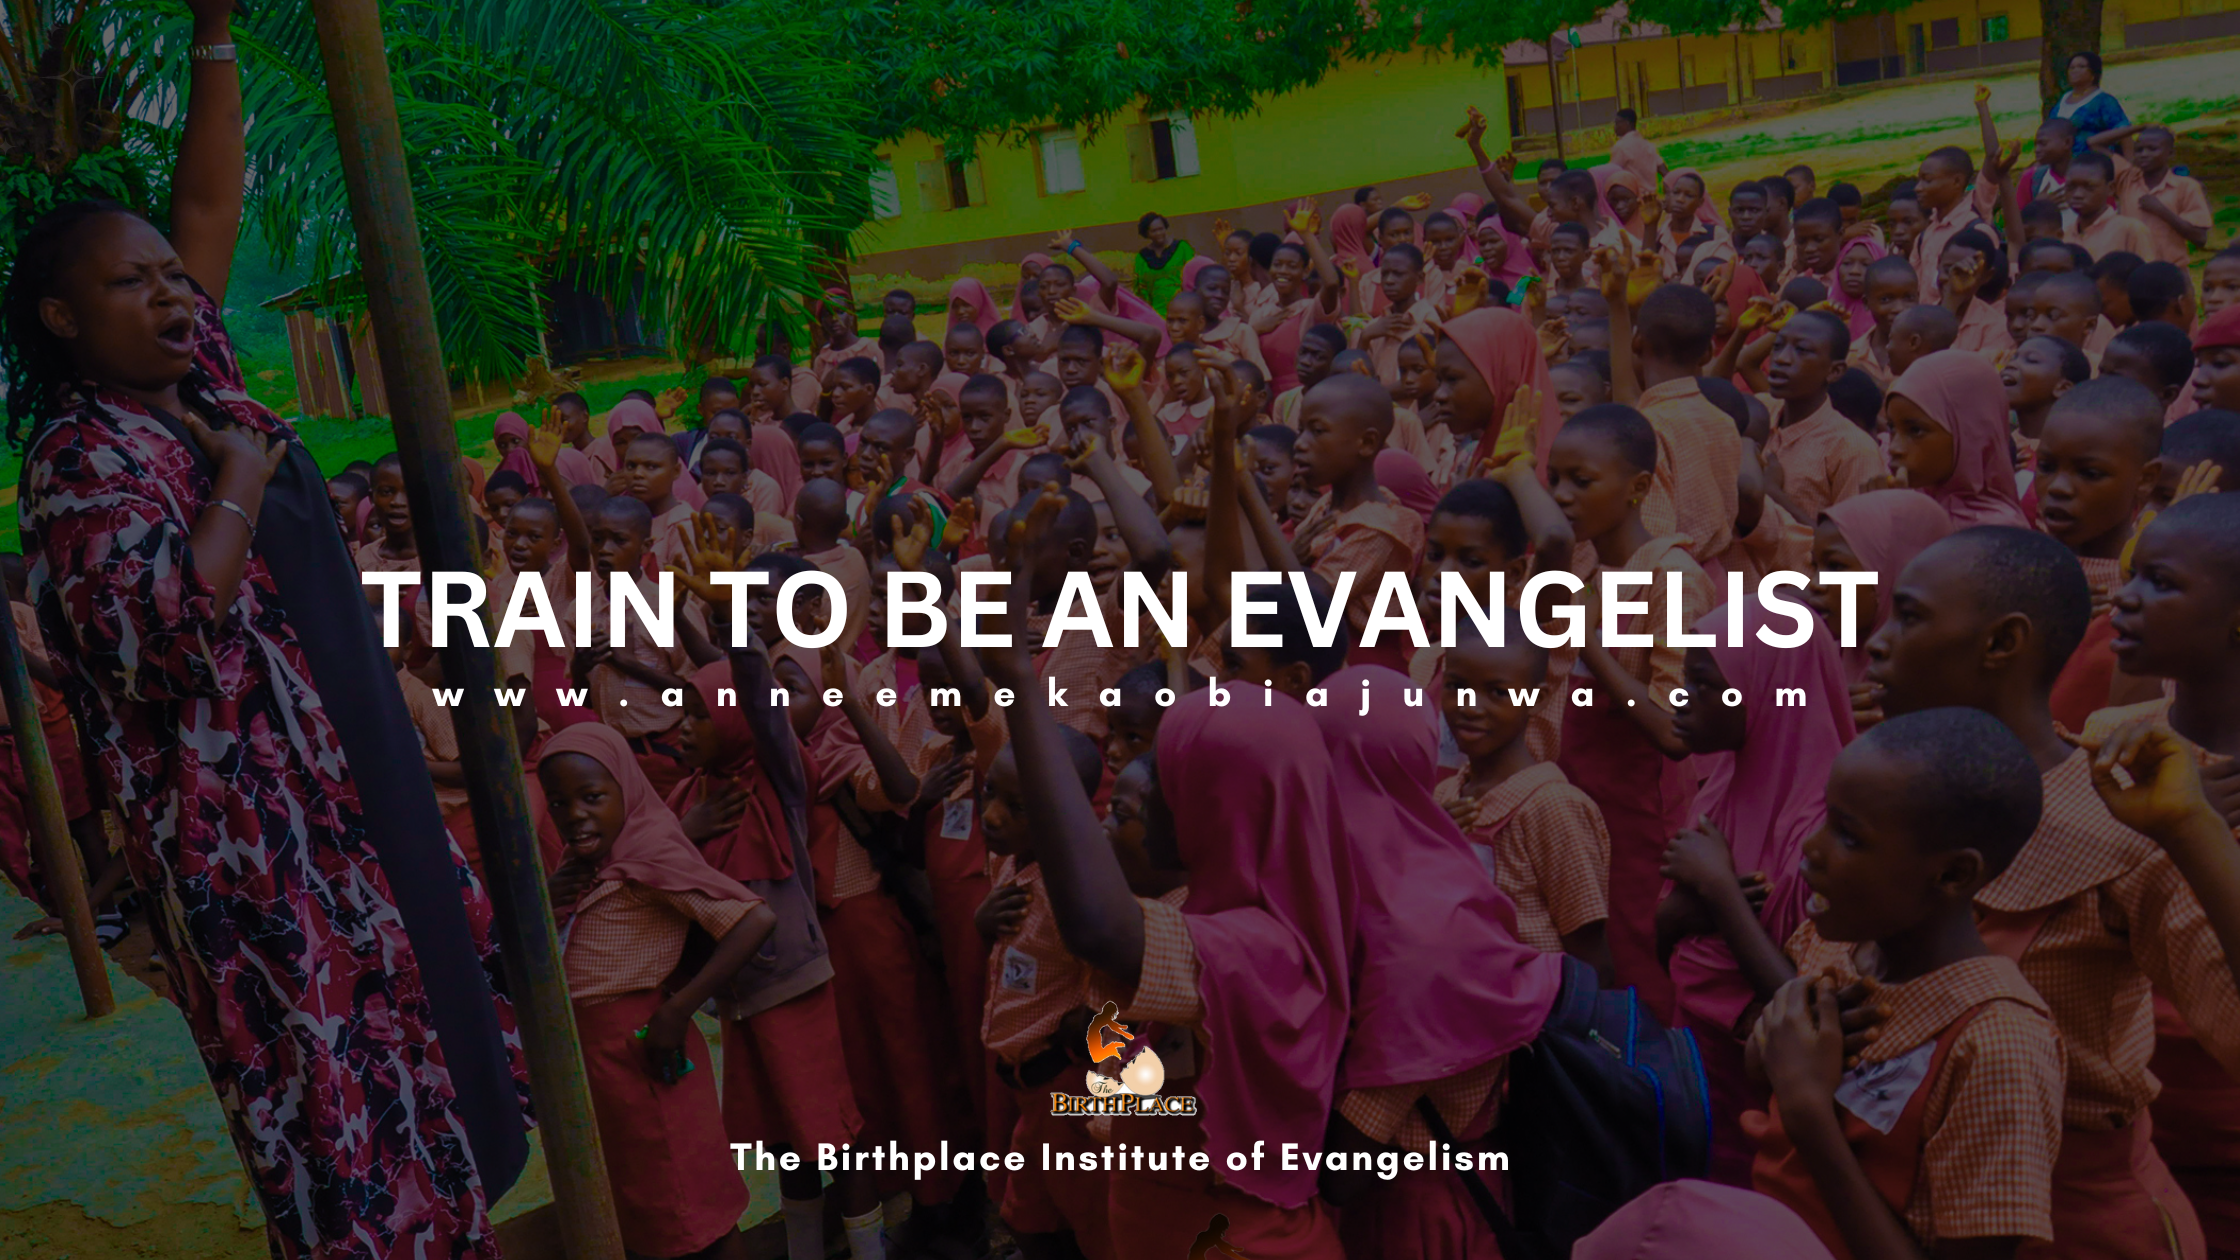 The birthplace institute of evangelism